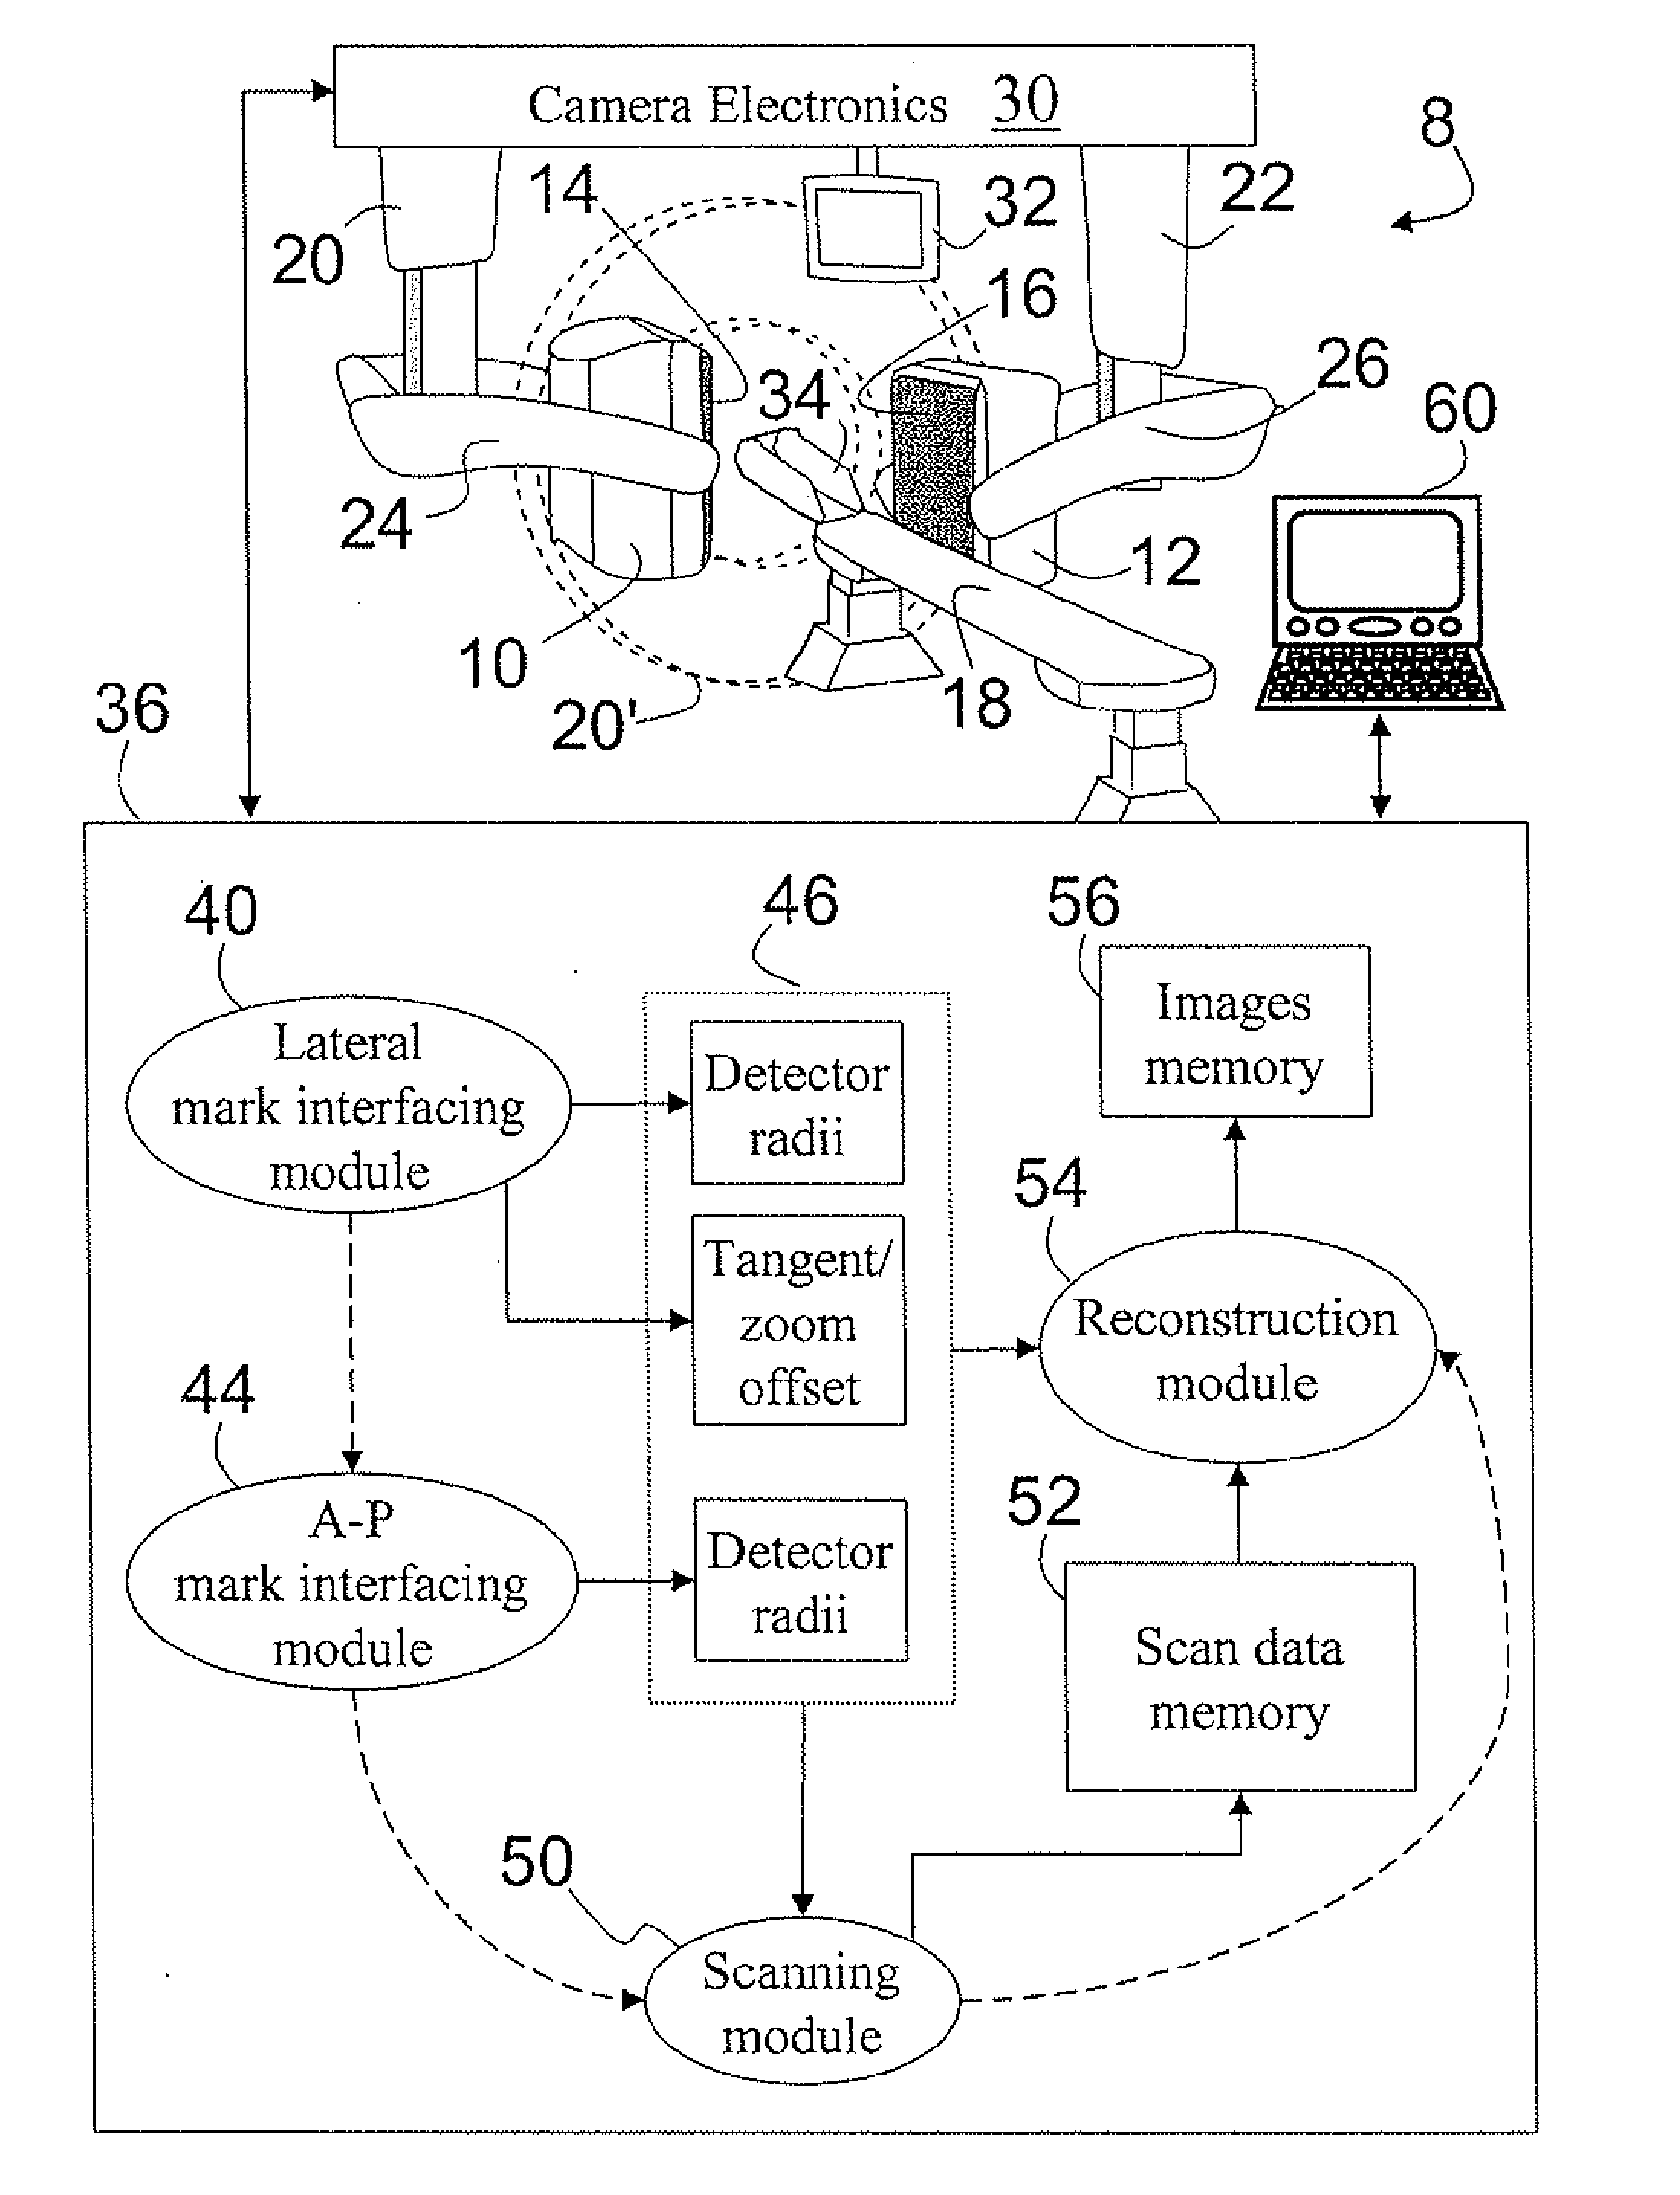 Method and apparatus for human brain imaging using a nuclear medicine camera